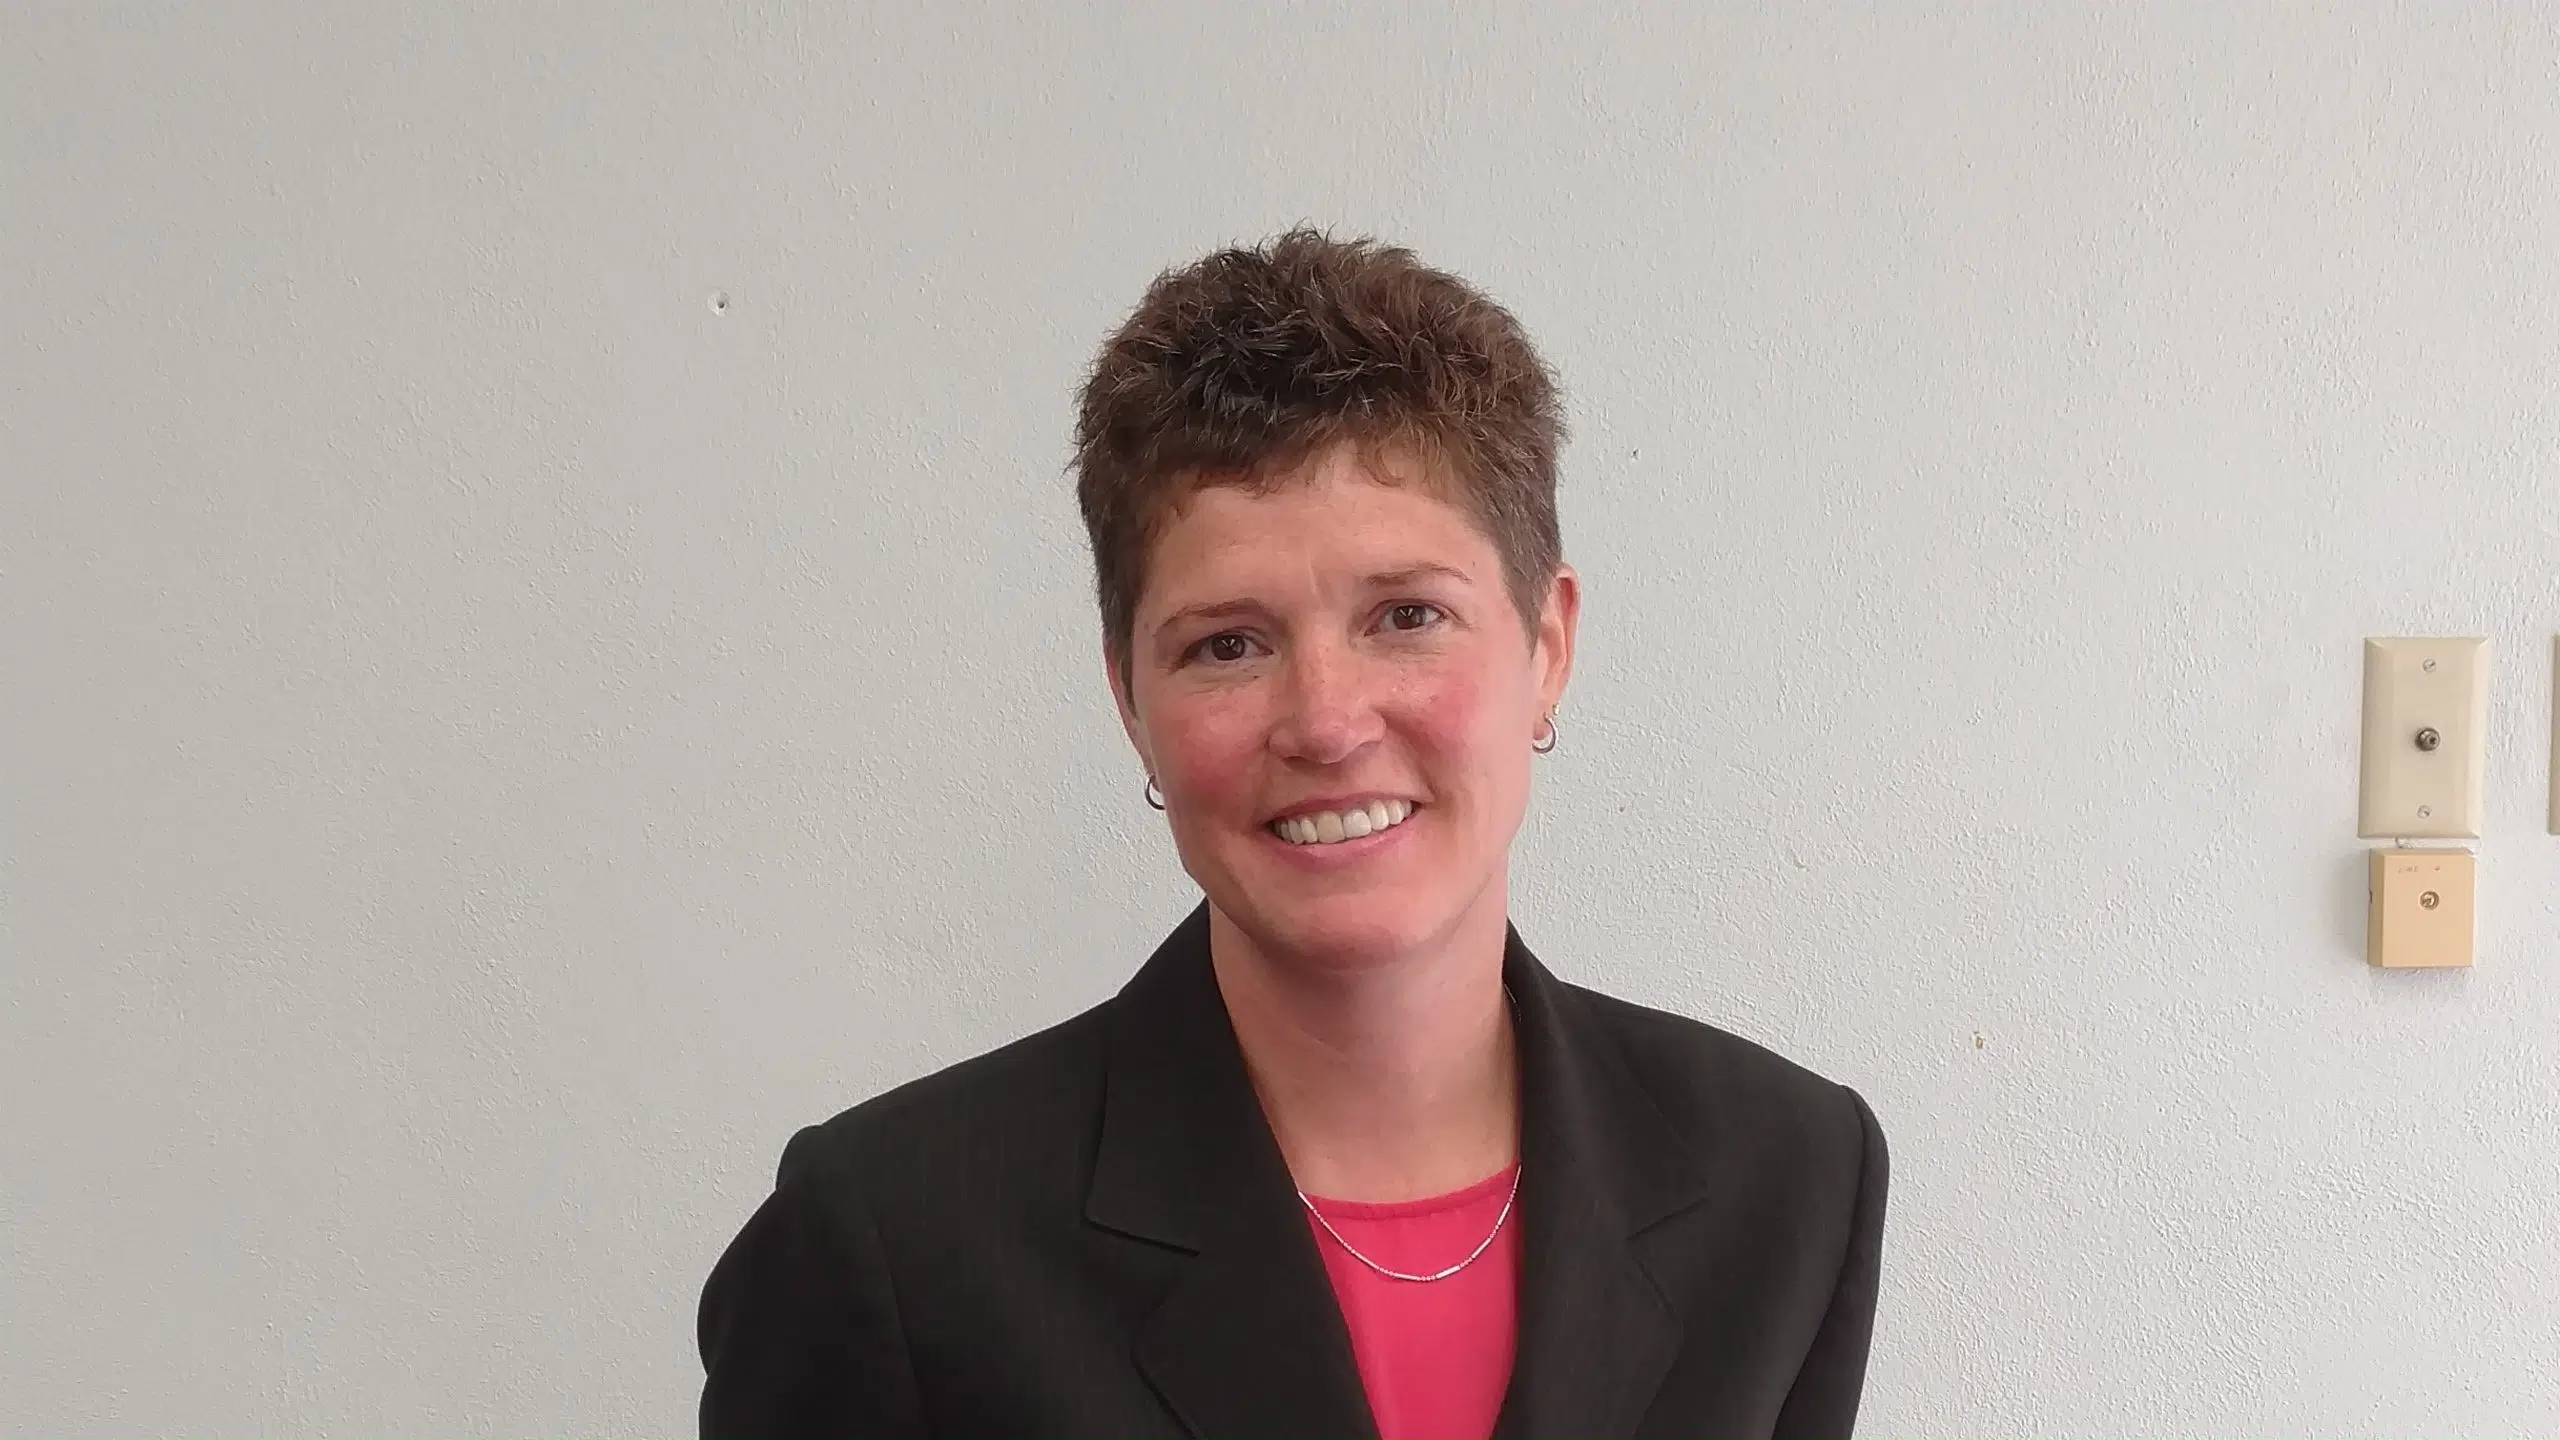 Amber Daulbaugh hired as new Economic Development Director for City of Vandalia 